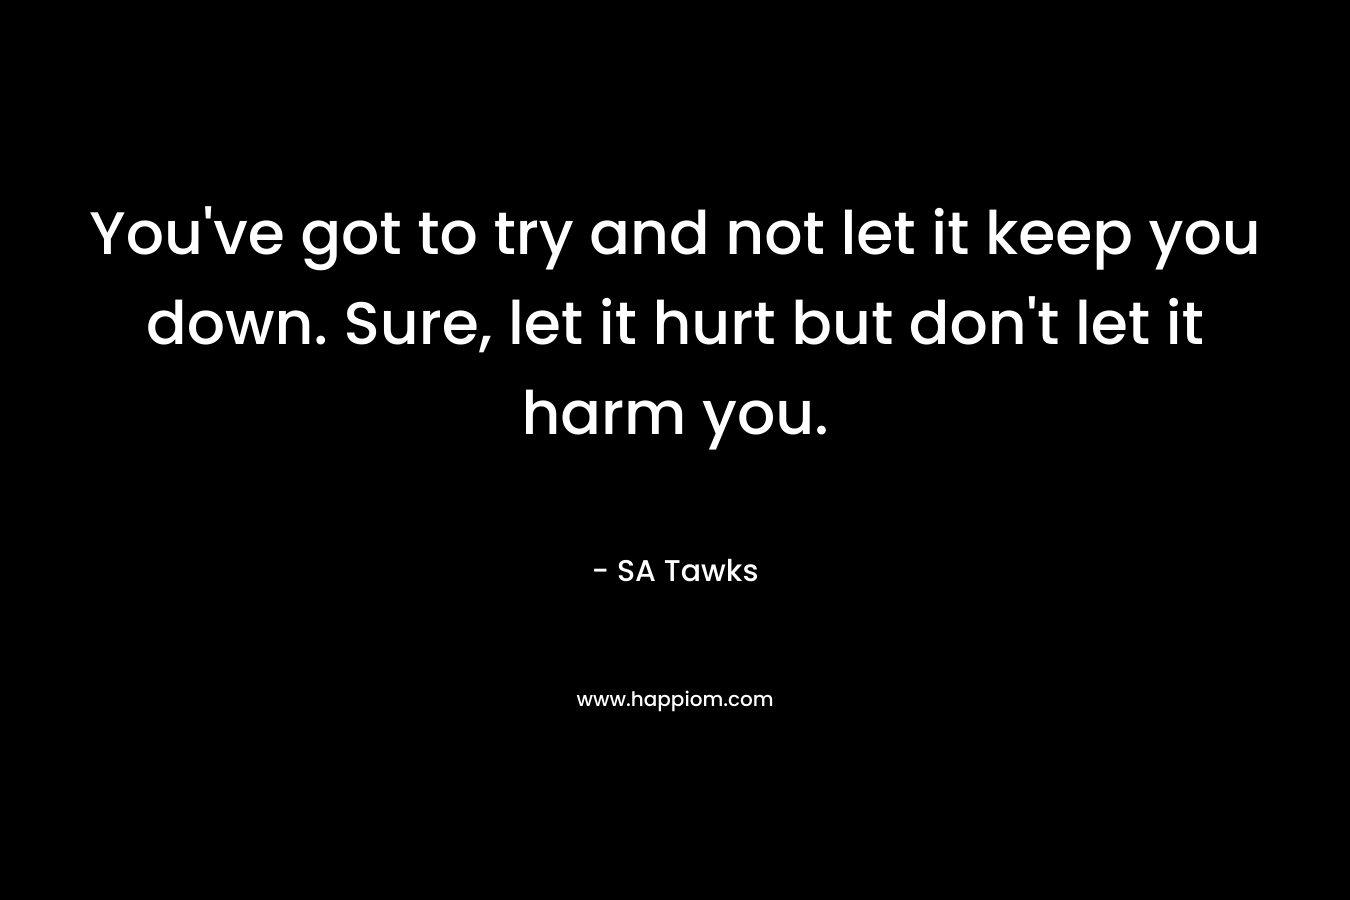 You've got to try and not let it keep you down. Sure, let it hurt but don't let it harm you.